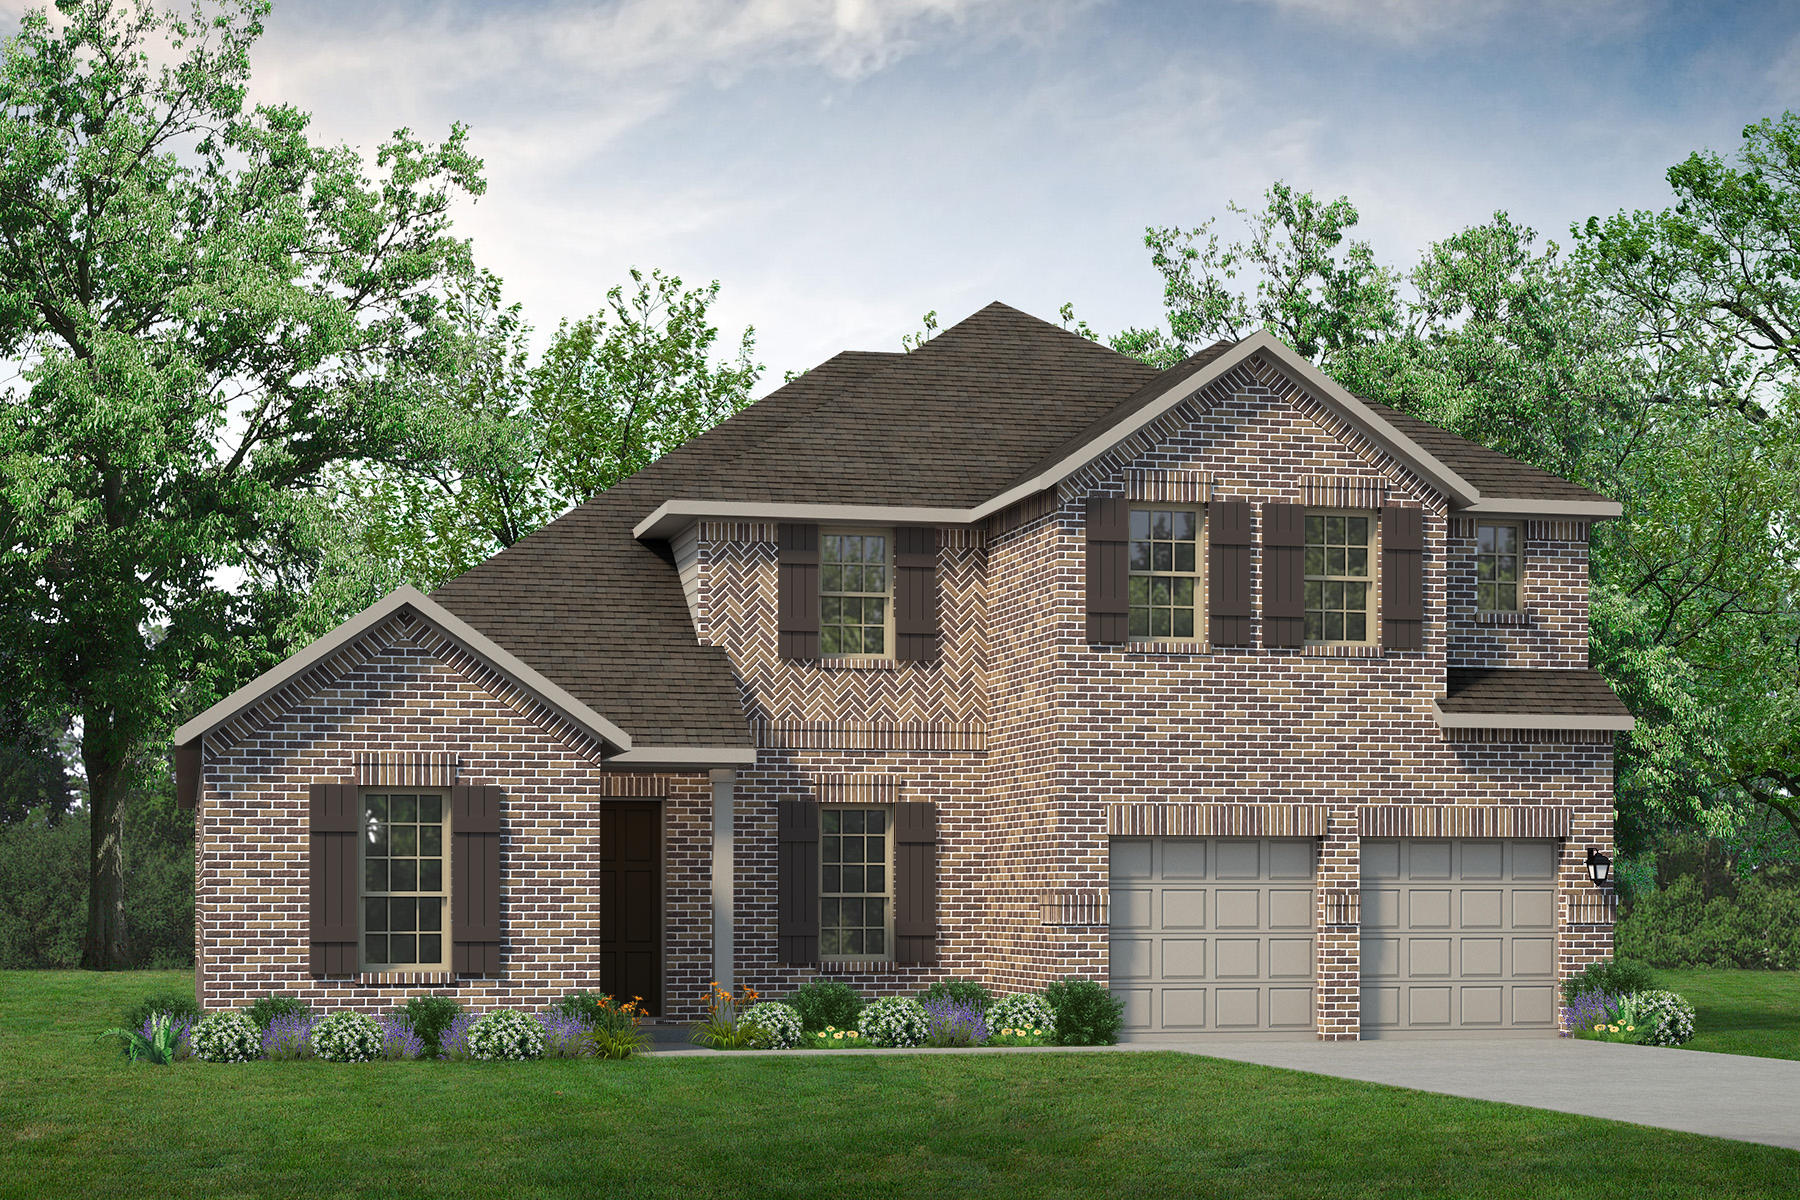 A promotional rendering of a brick home with a garage.